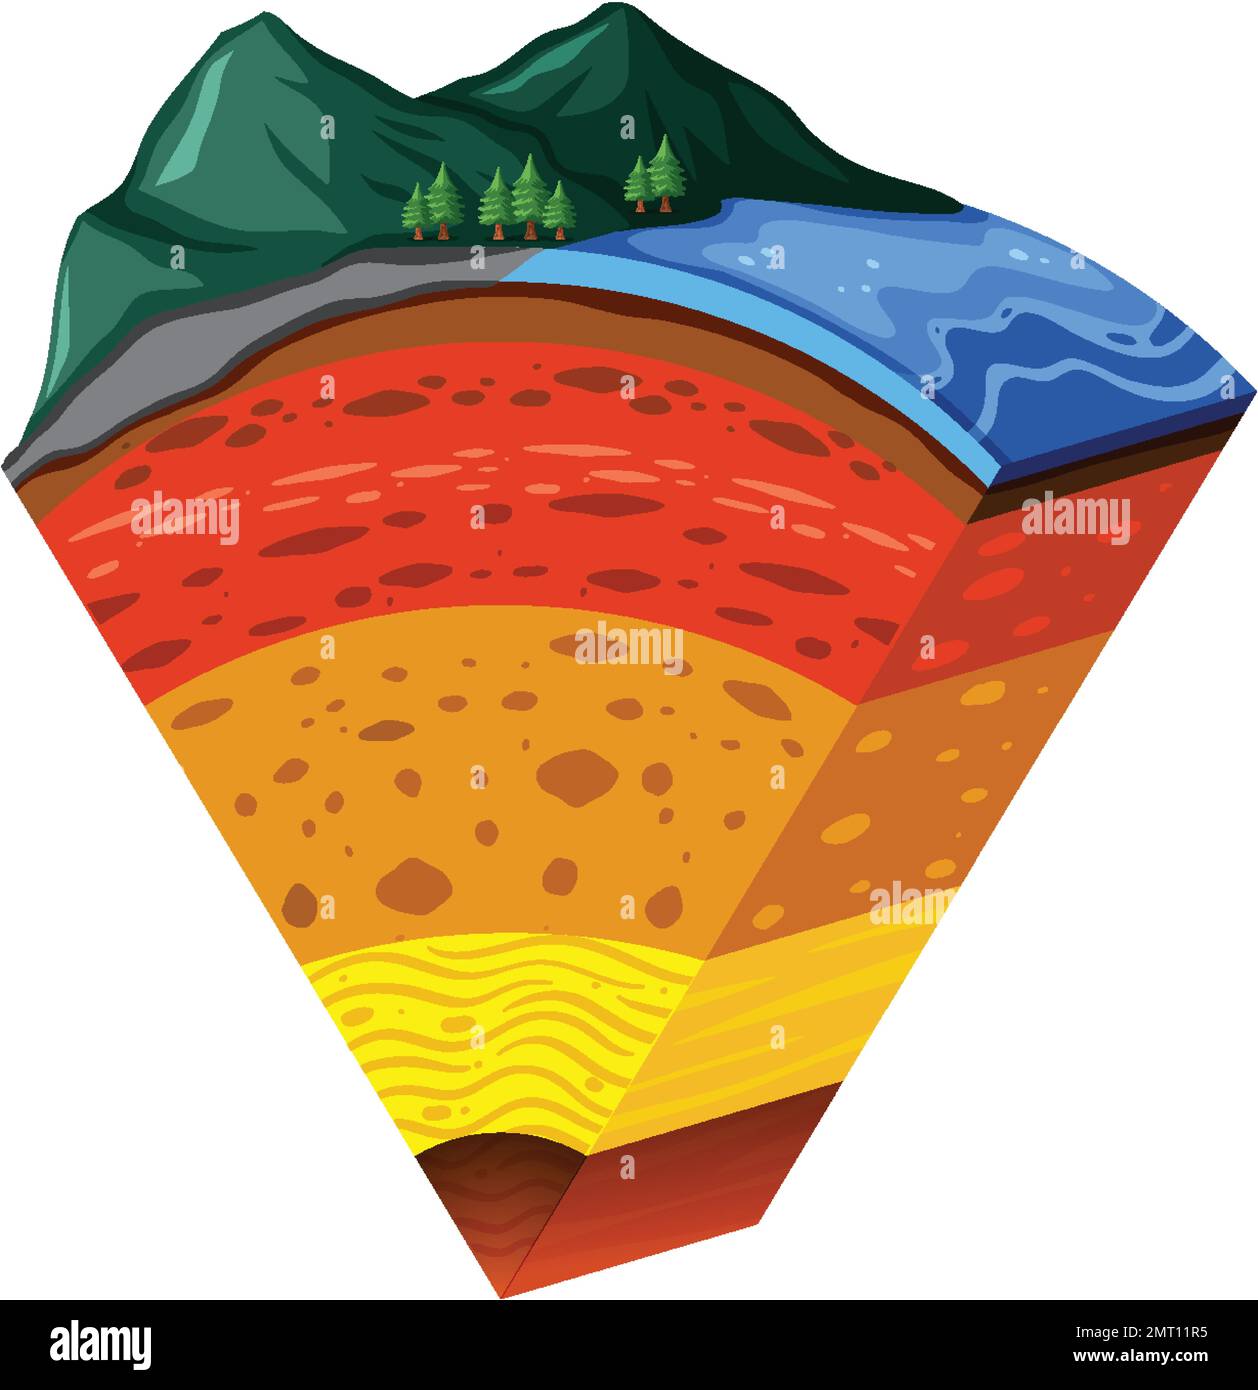 Layers of the Earth Lithosphere illustration Stock Vector